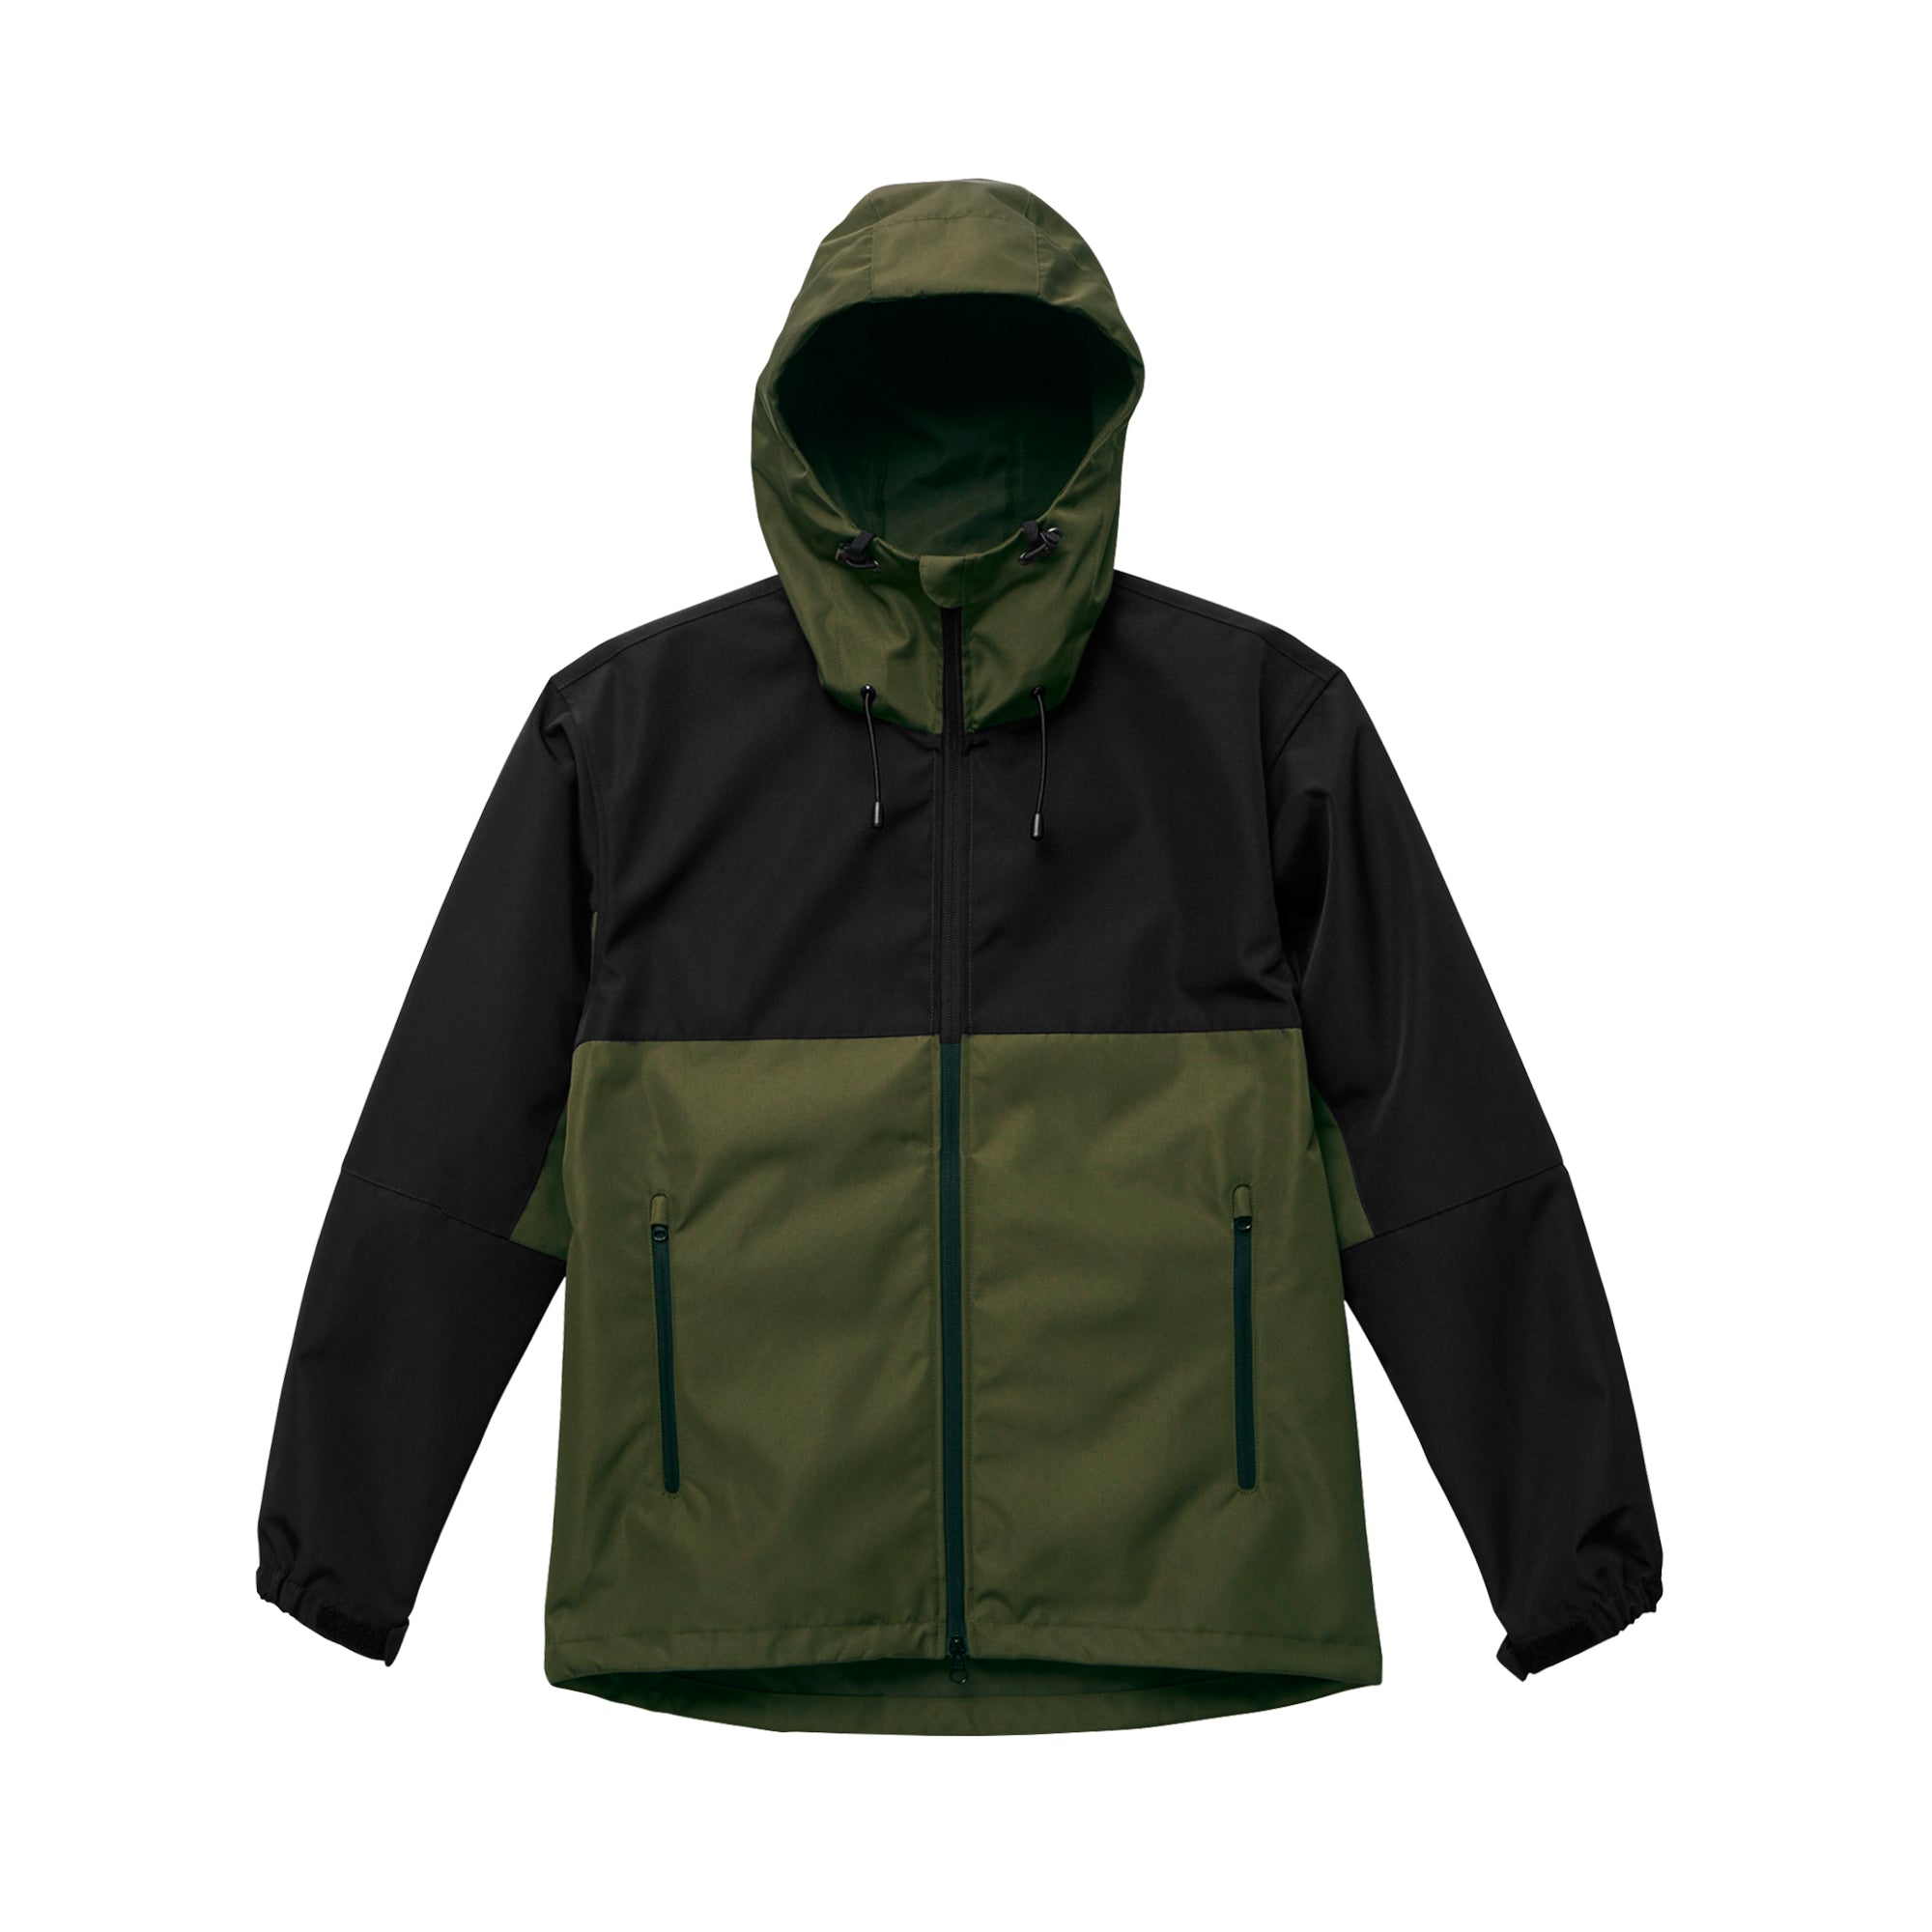 7489 - Switching shell parka - Olive/Black x 1